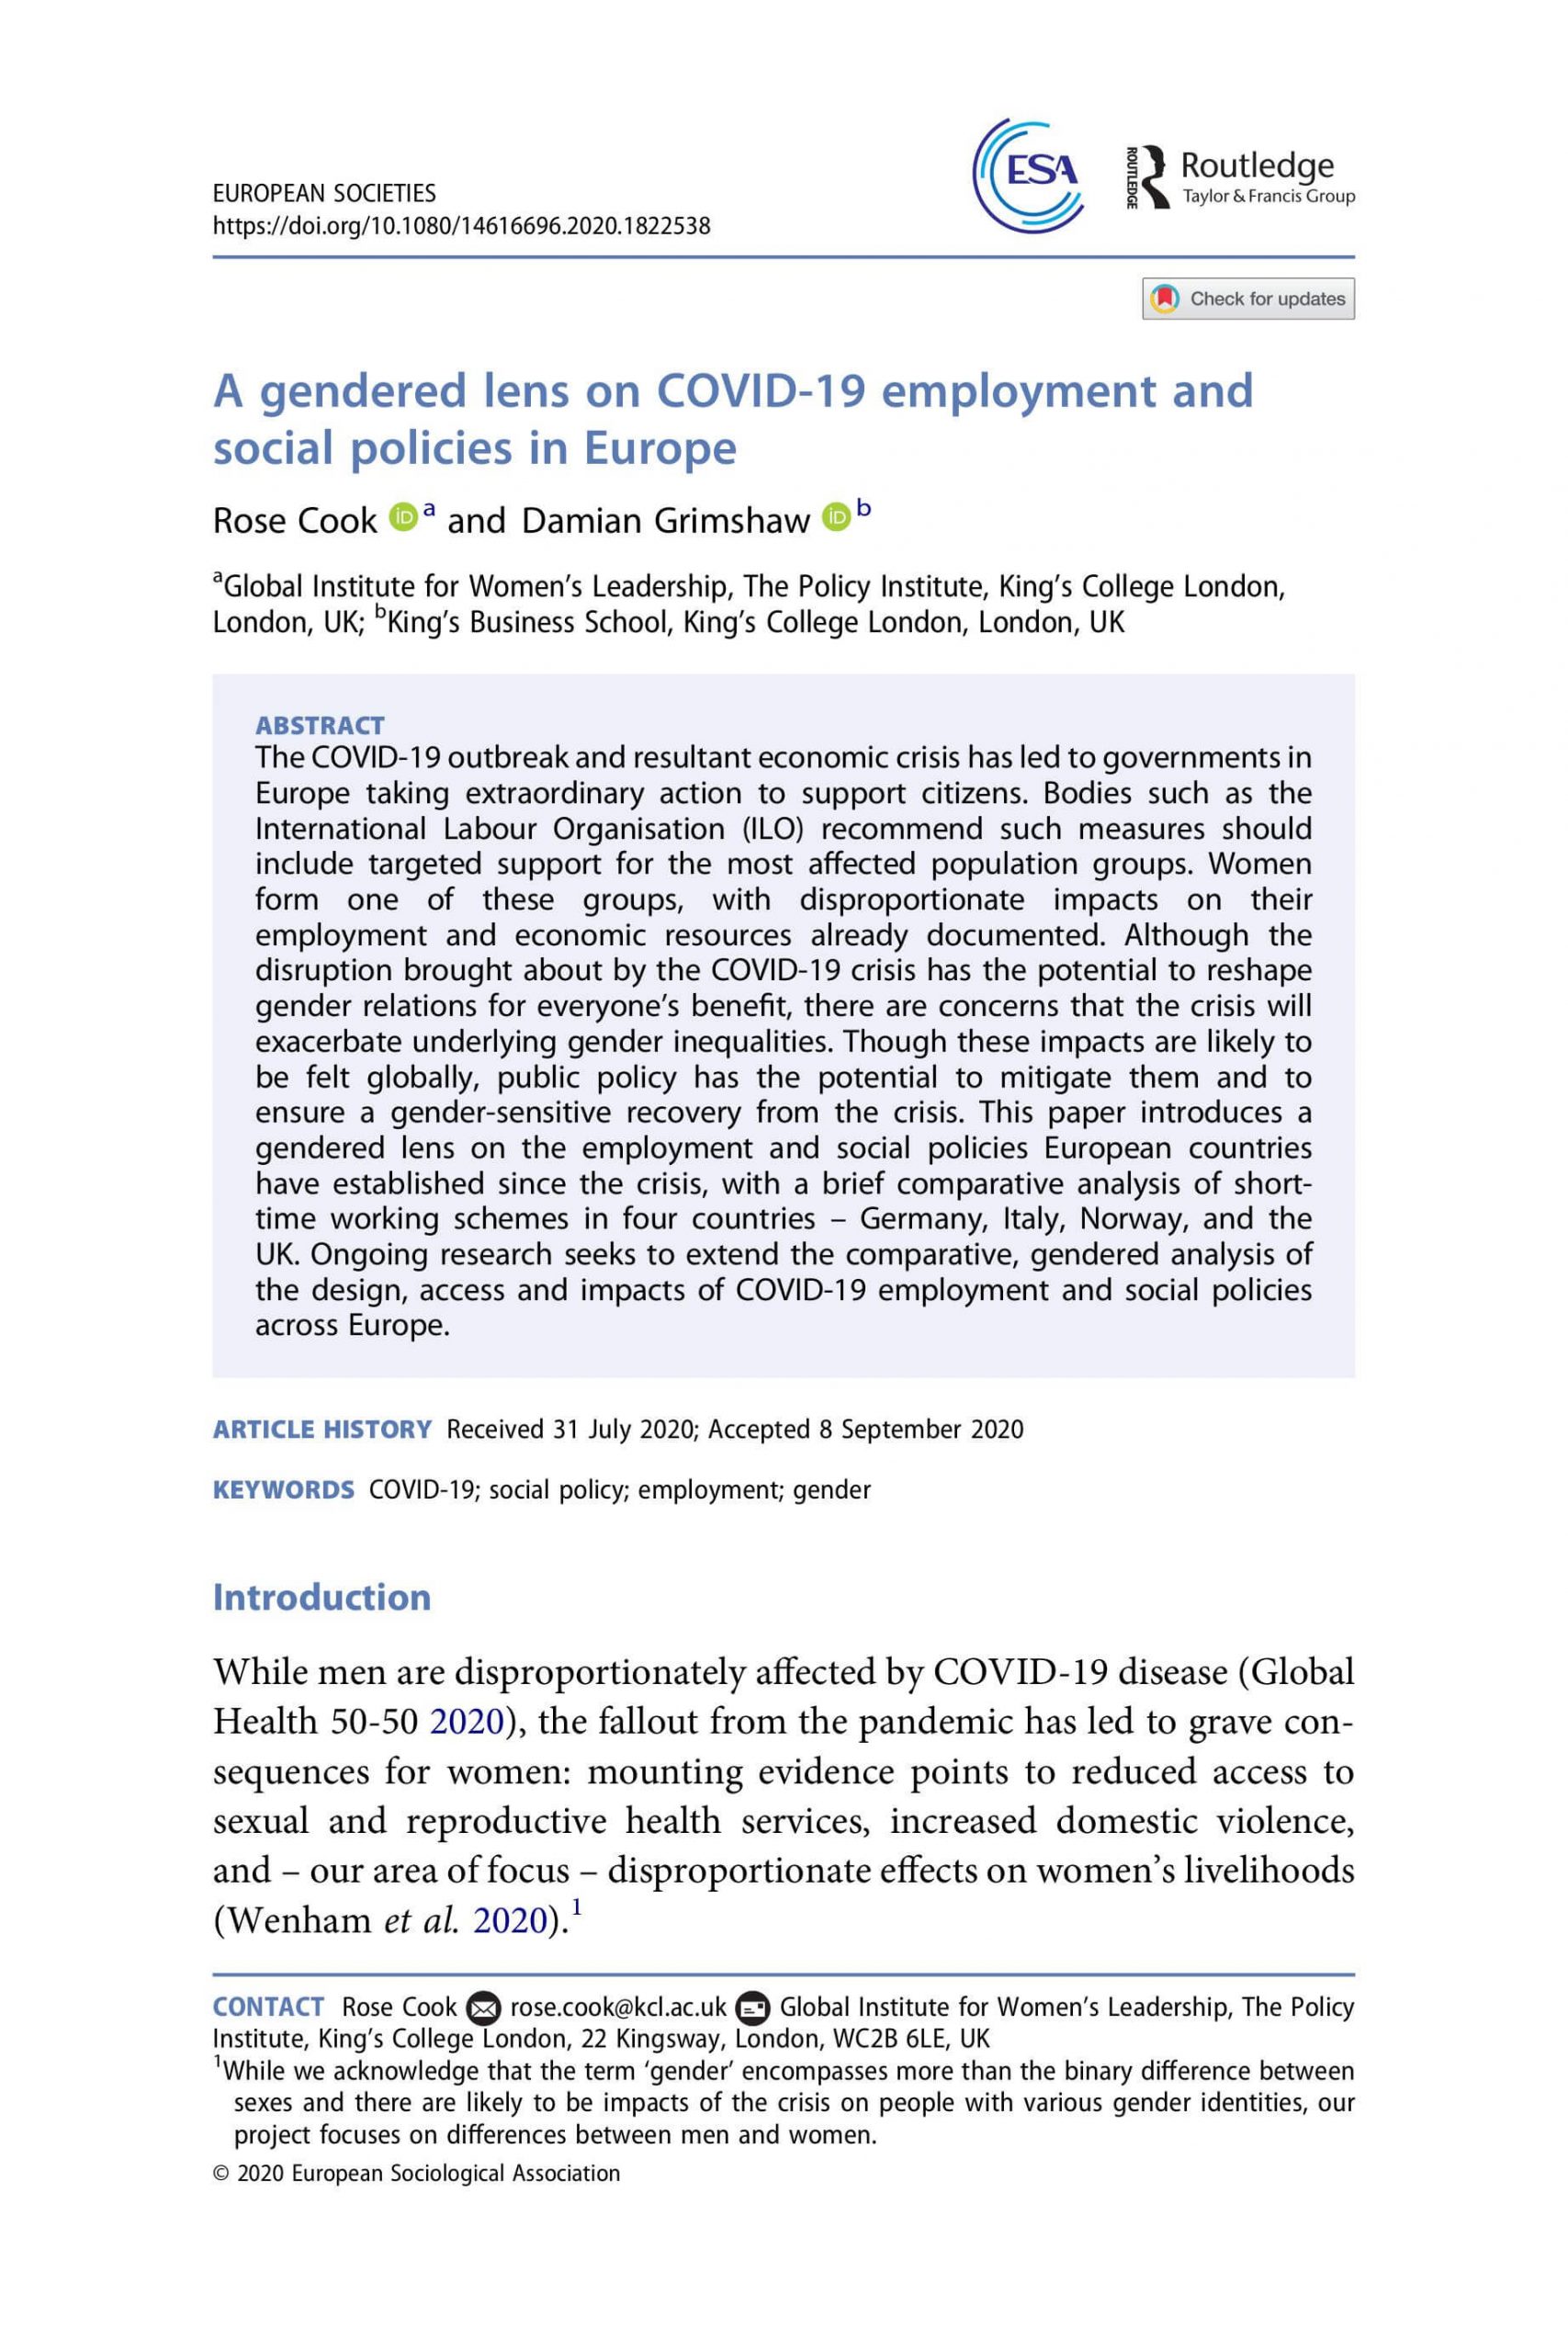 A gendered lens on COVID-19 employment and social policies in Europe